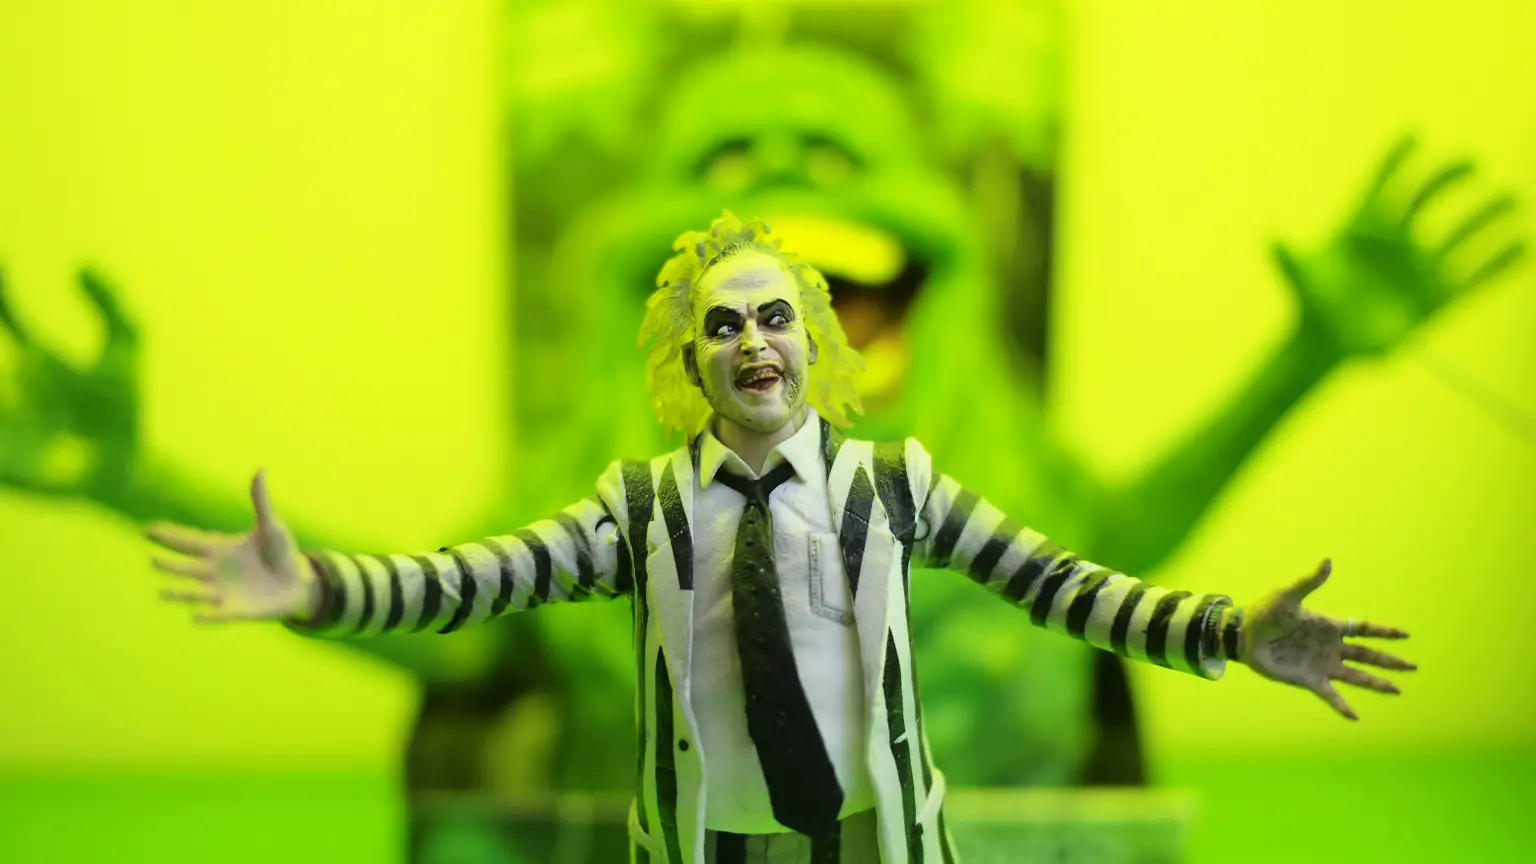 30 Funny Beetlejuice Quotes From The Movie | Turtle Quotes